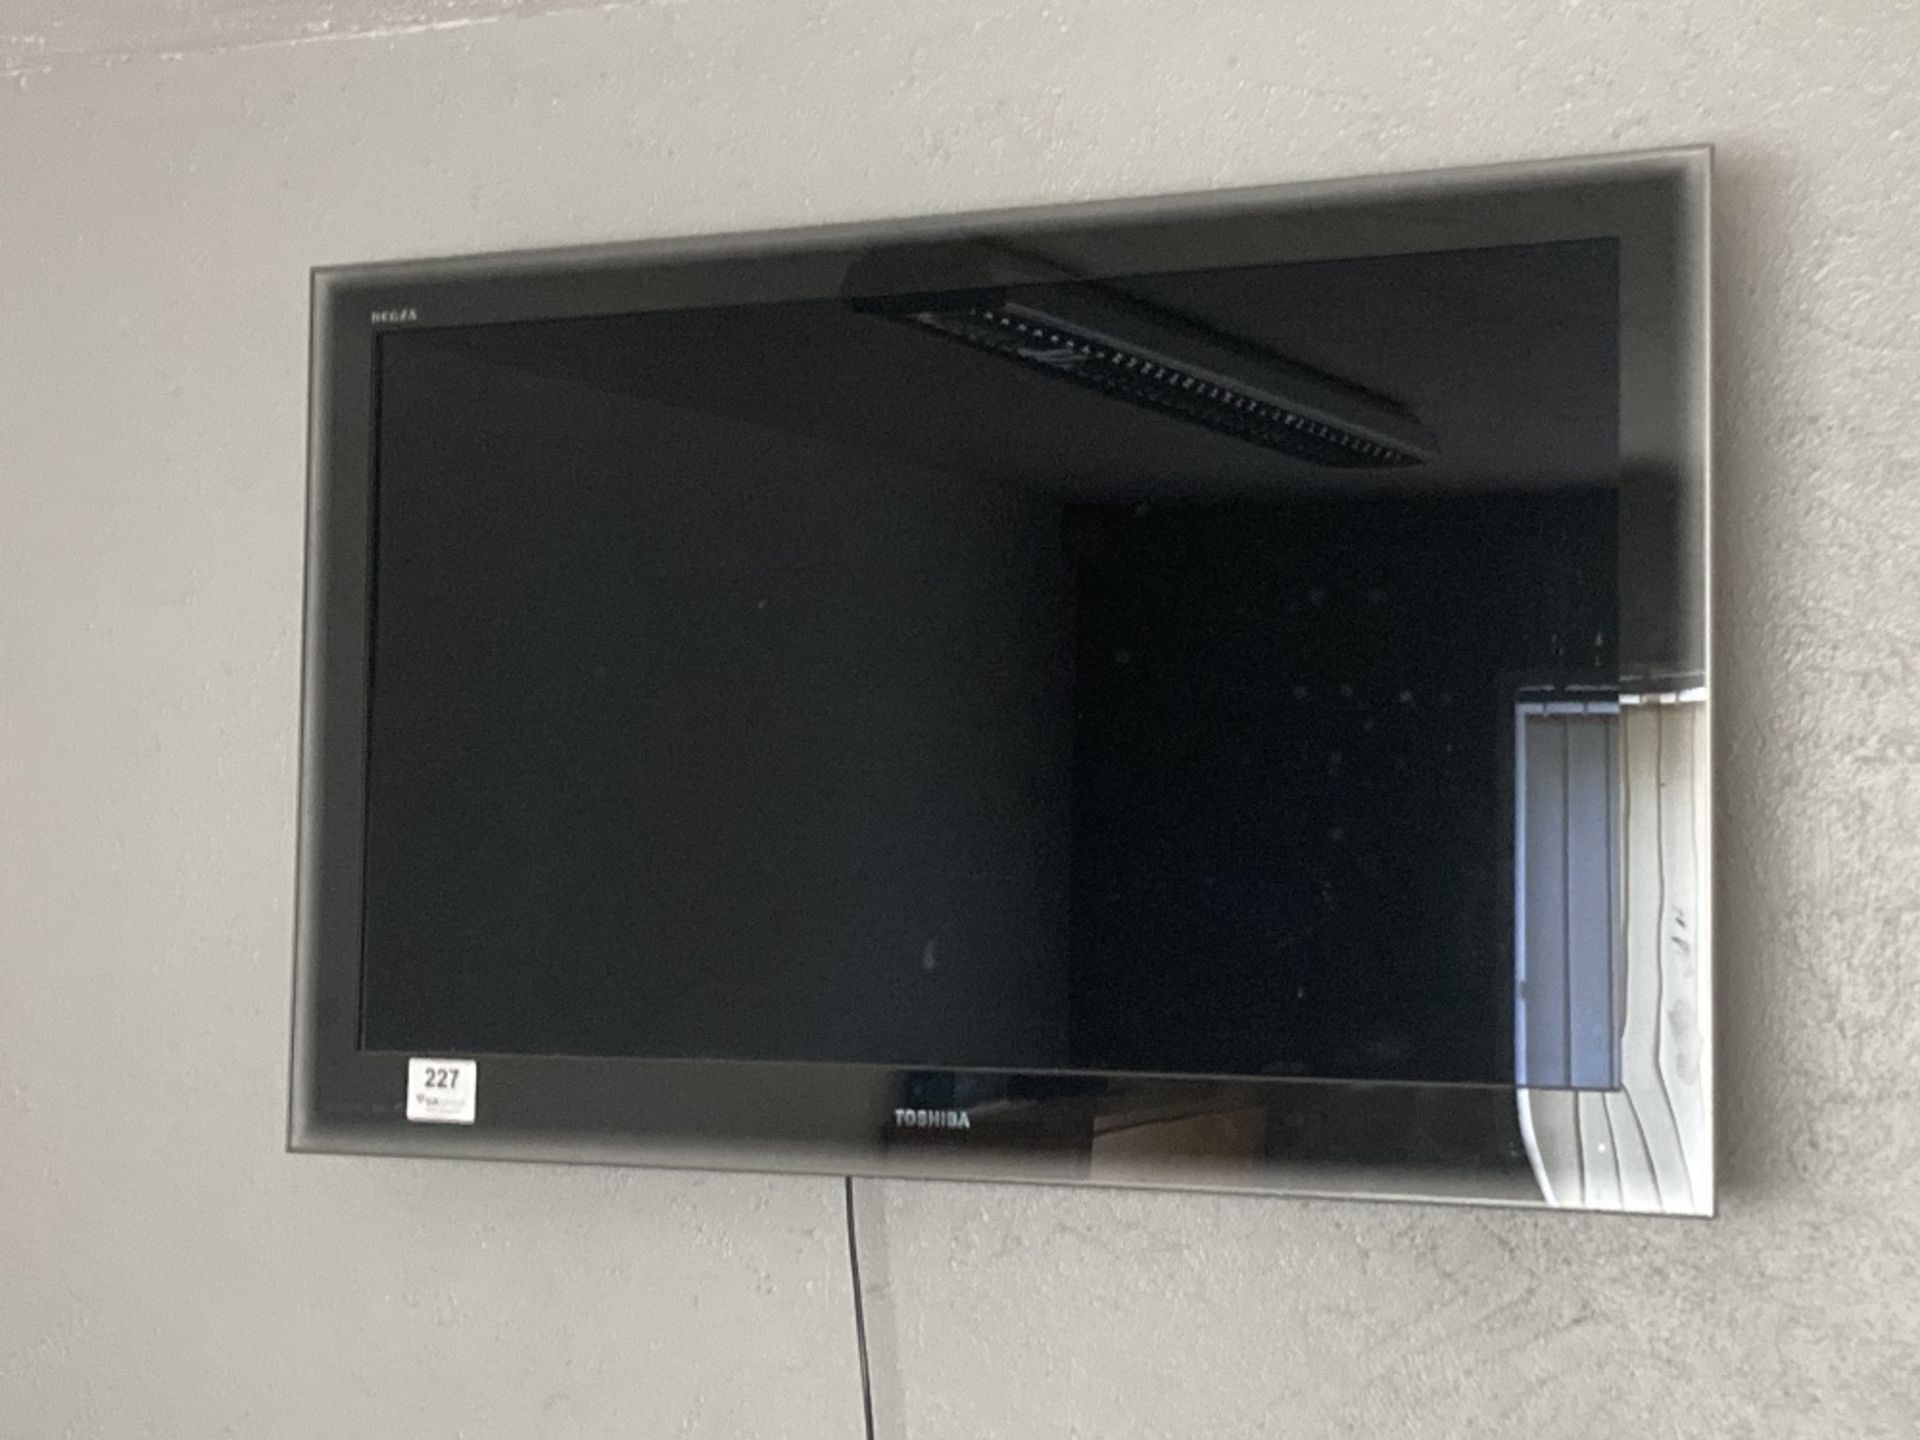 Toshiba Flat Screen Television complete with Wall Bracket